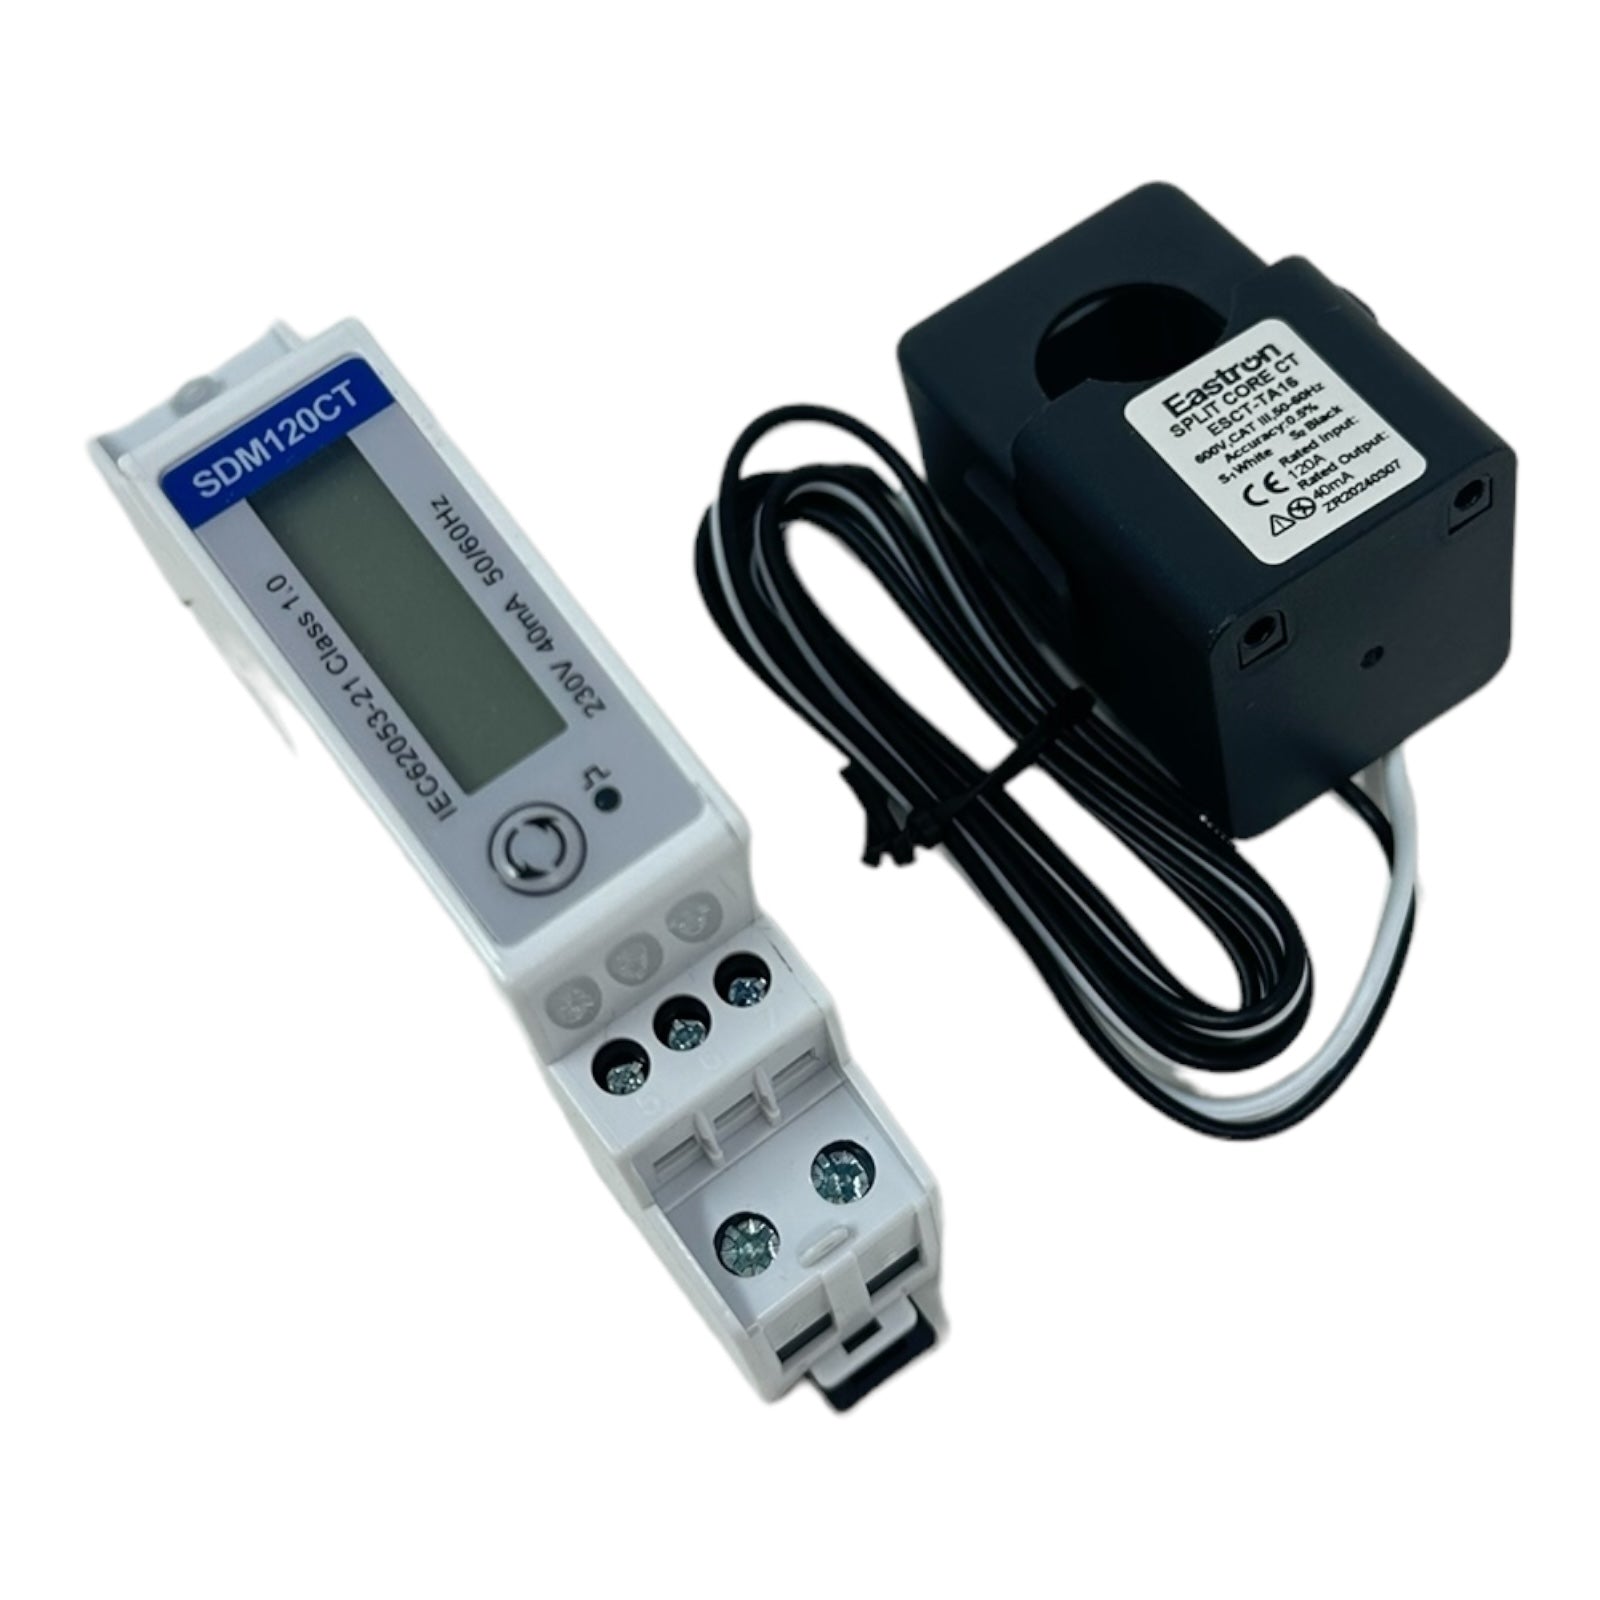 Single-phase Multifunction Din Rail Meter - SDM120CTM /40mA Modbus with CT-40mA